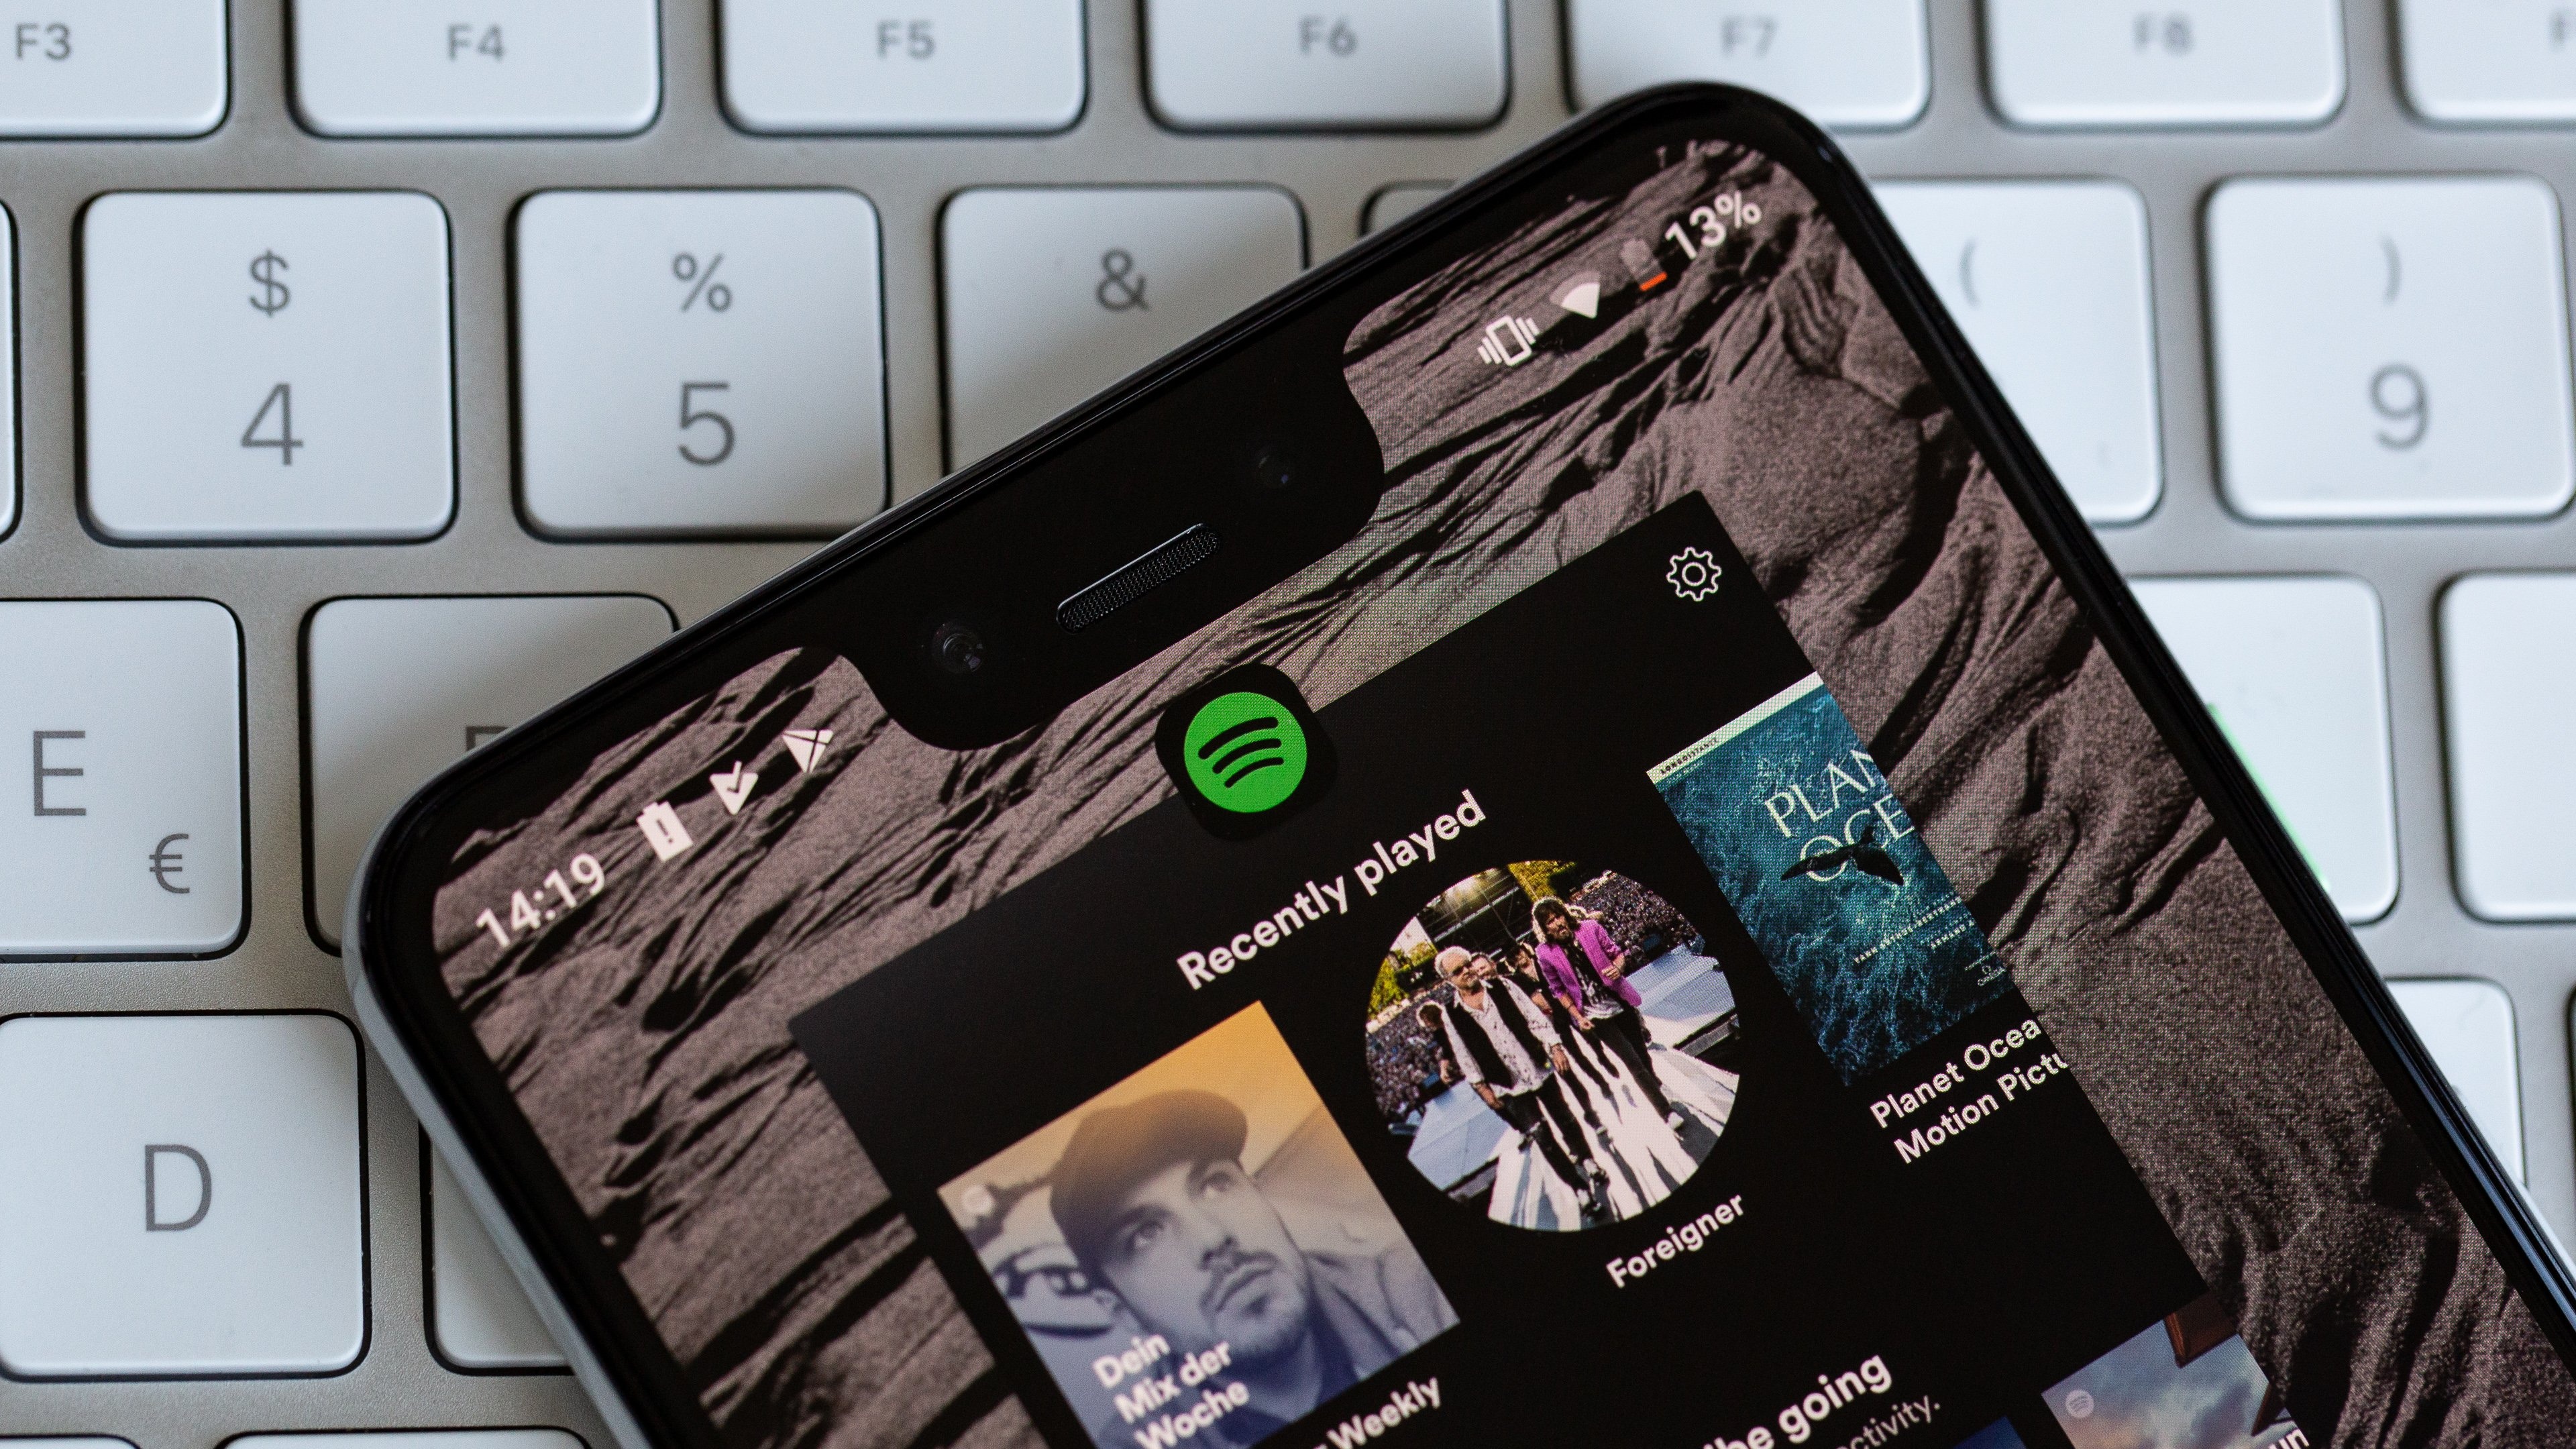 Spotify: A global hub for music, podcasts, playlists, and videos, App on Google Play. 3840x2160 4K Wallpaper.